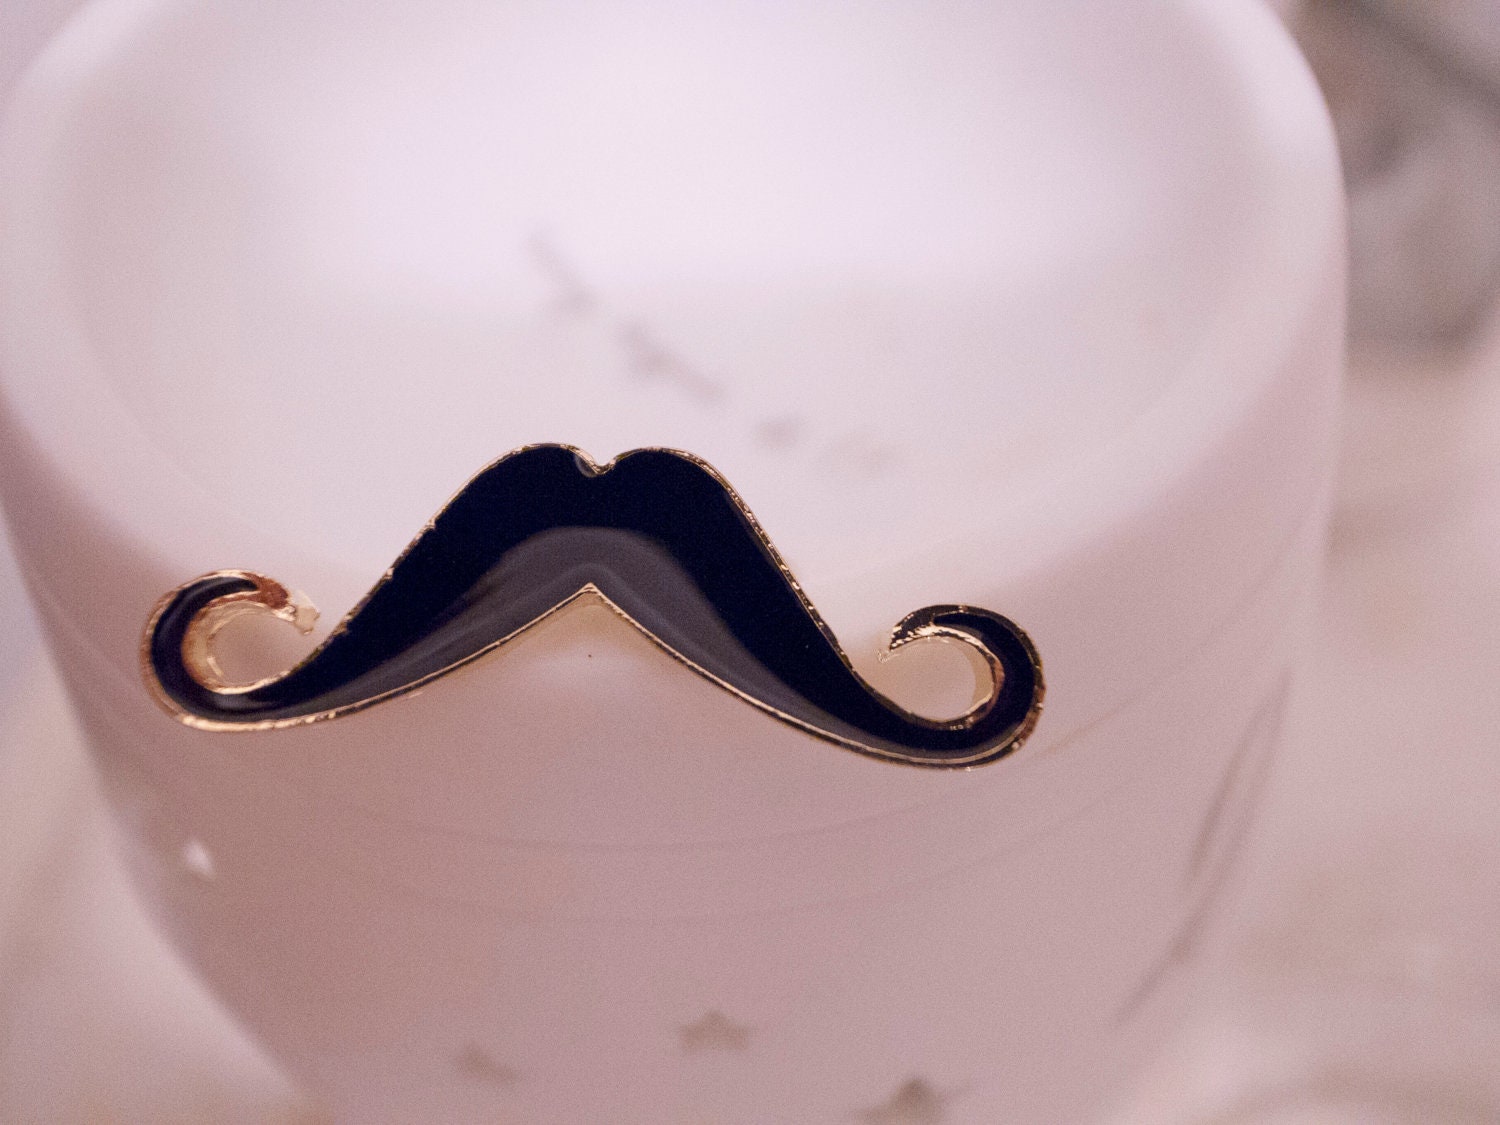 SALE -- LAST STOCK -- Funny and Chic Mustache Ring in Black - Size Adjustable